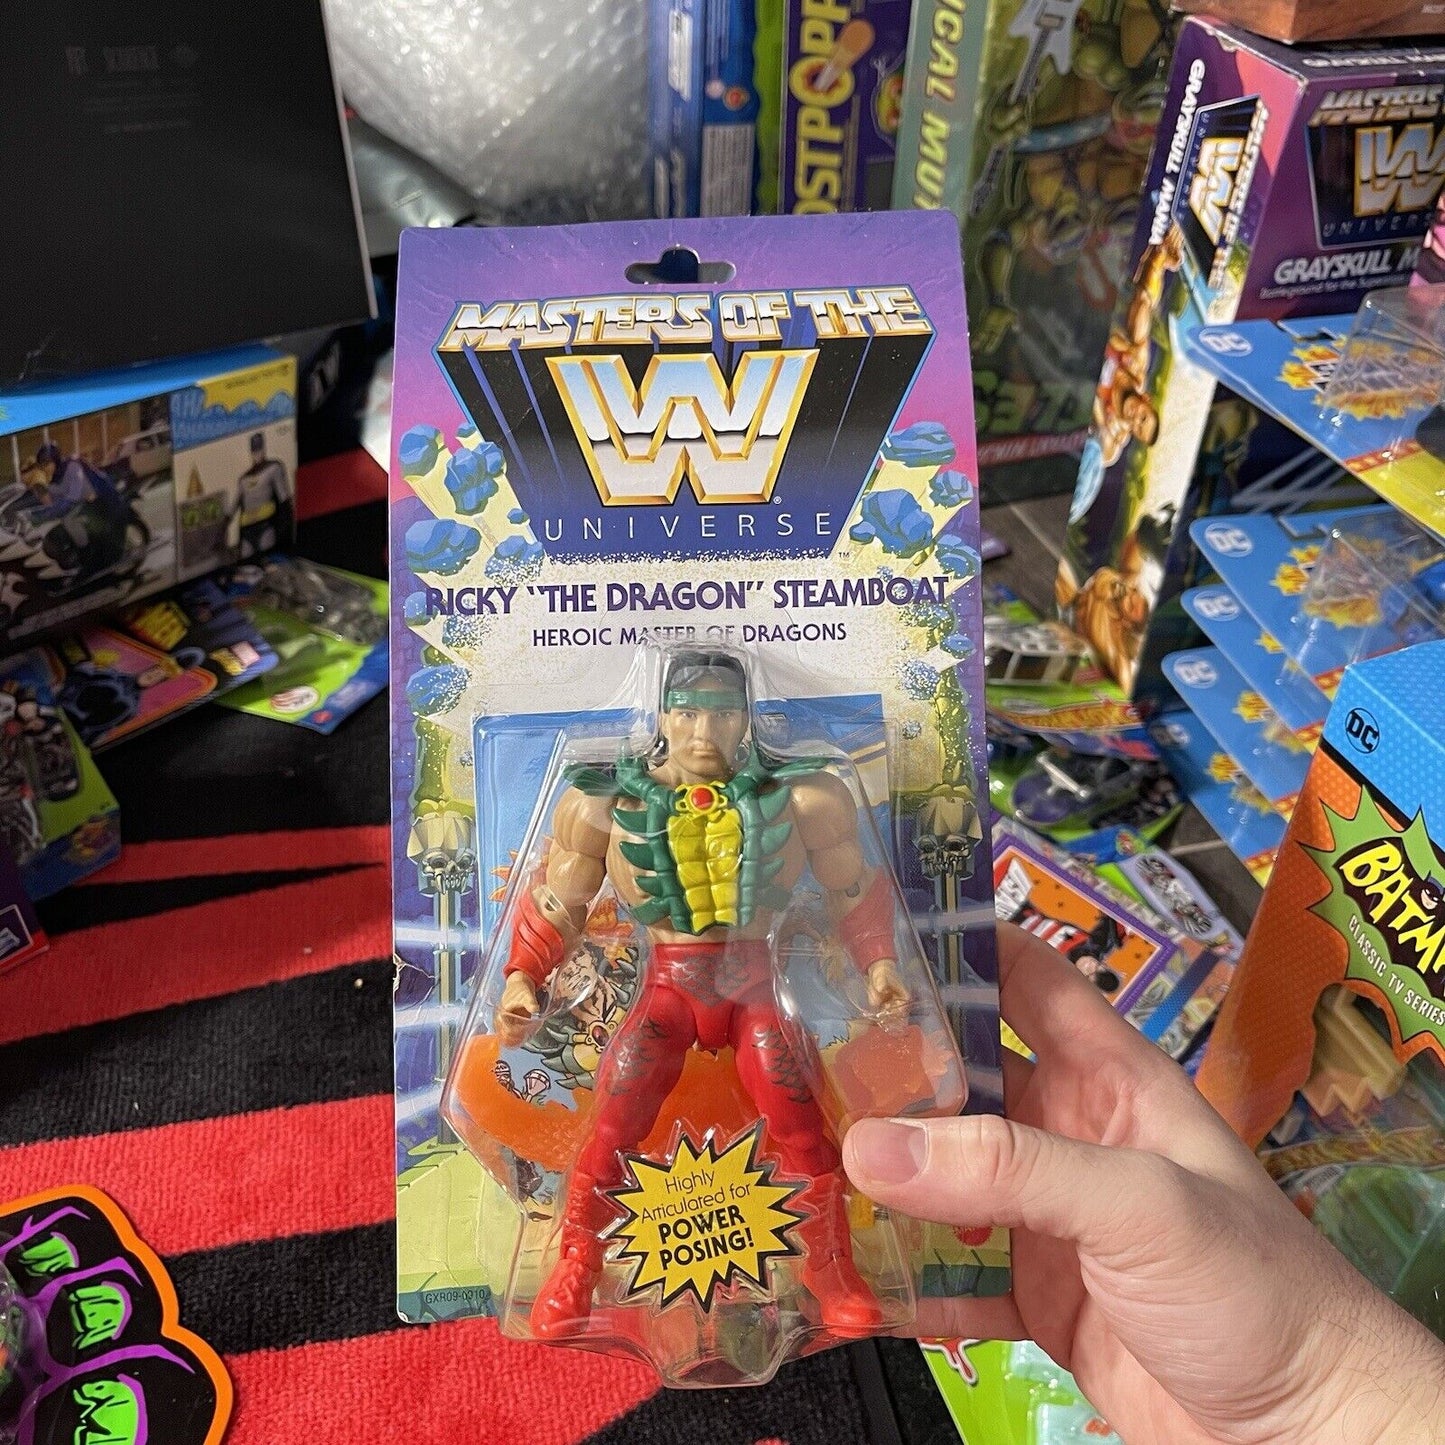 WWE Masters Of The Universe Ricky The Dragon Steamboat Mattel Action Figure MOTU